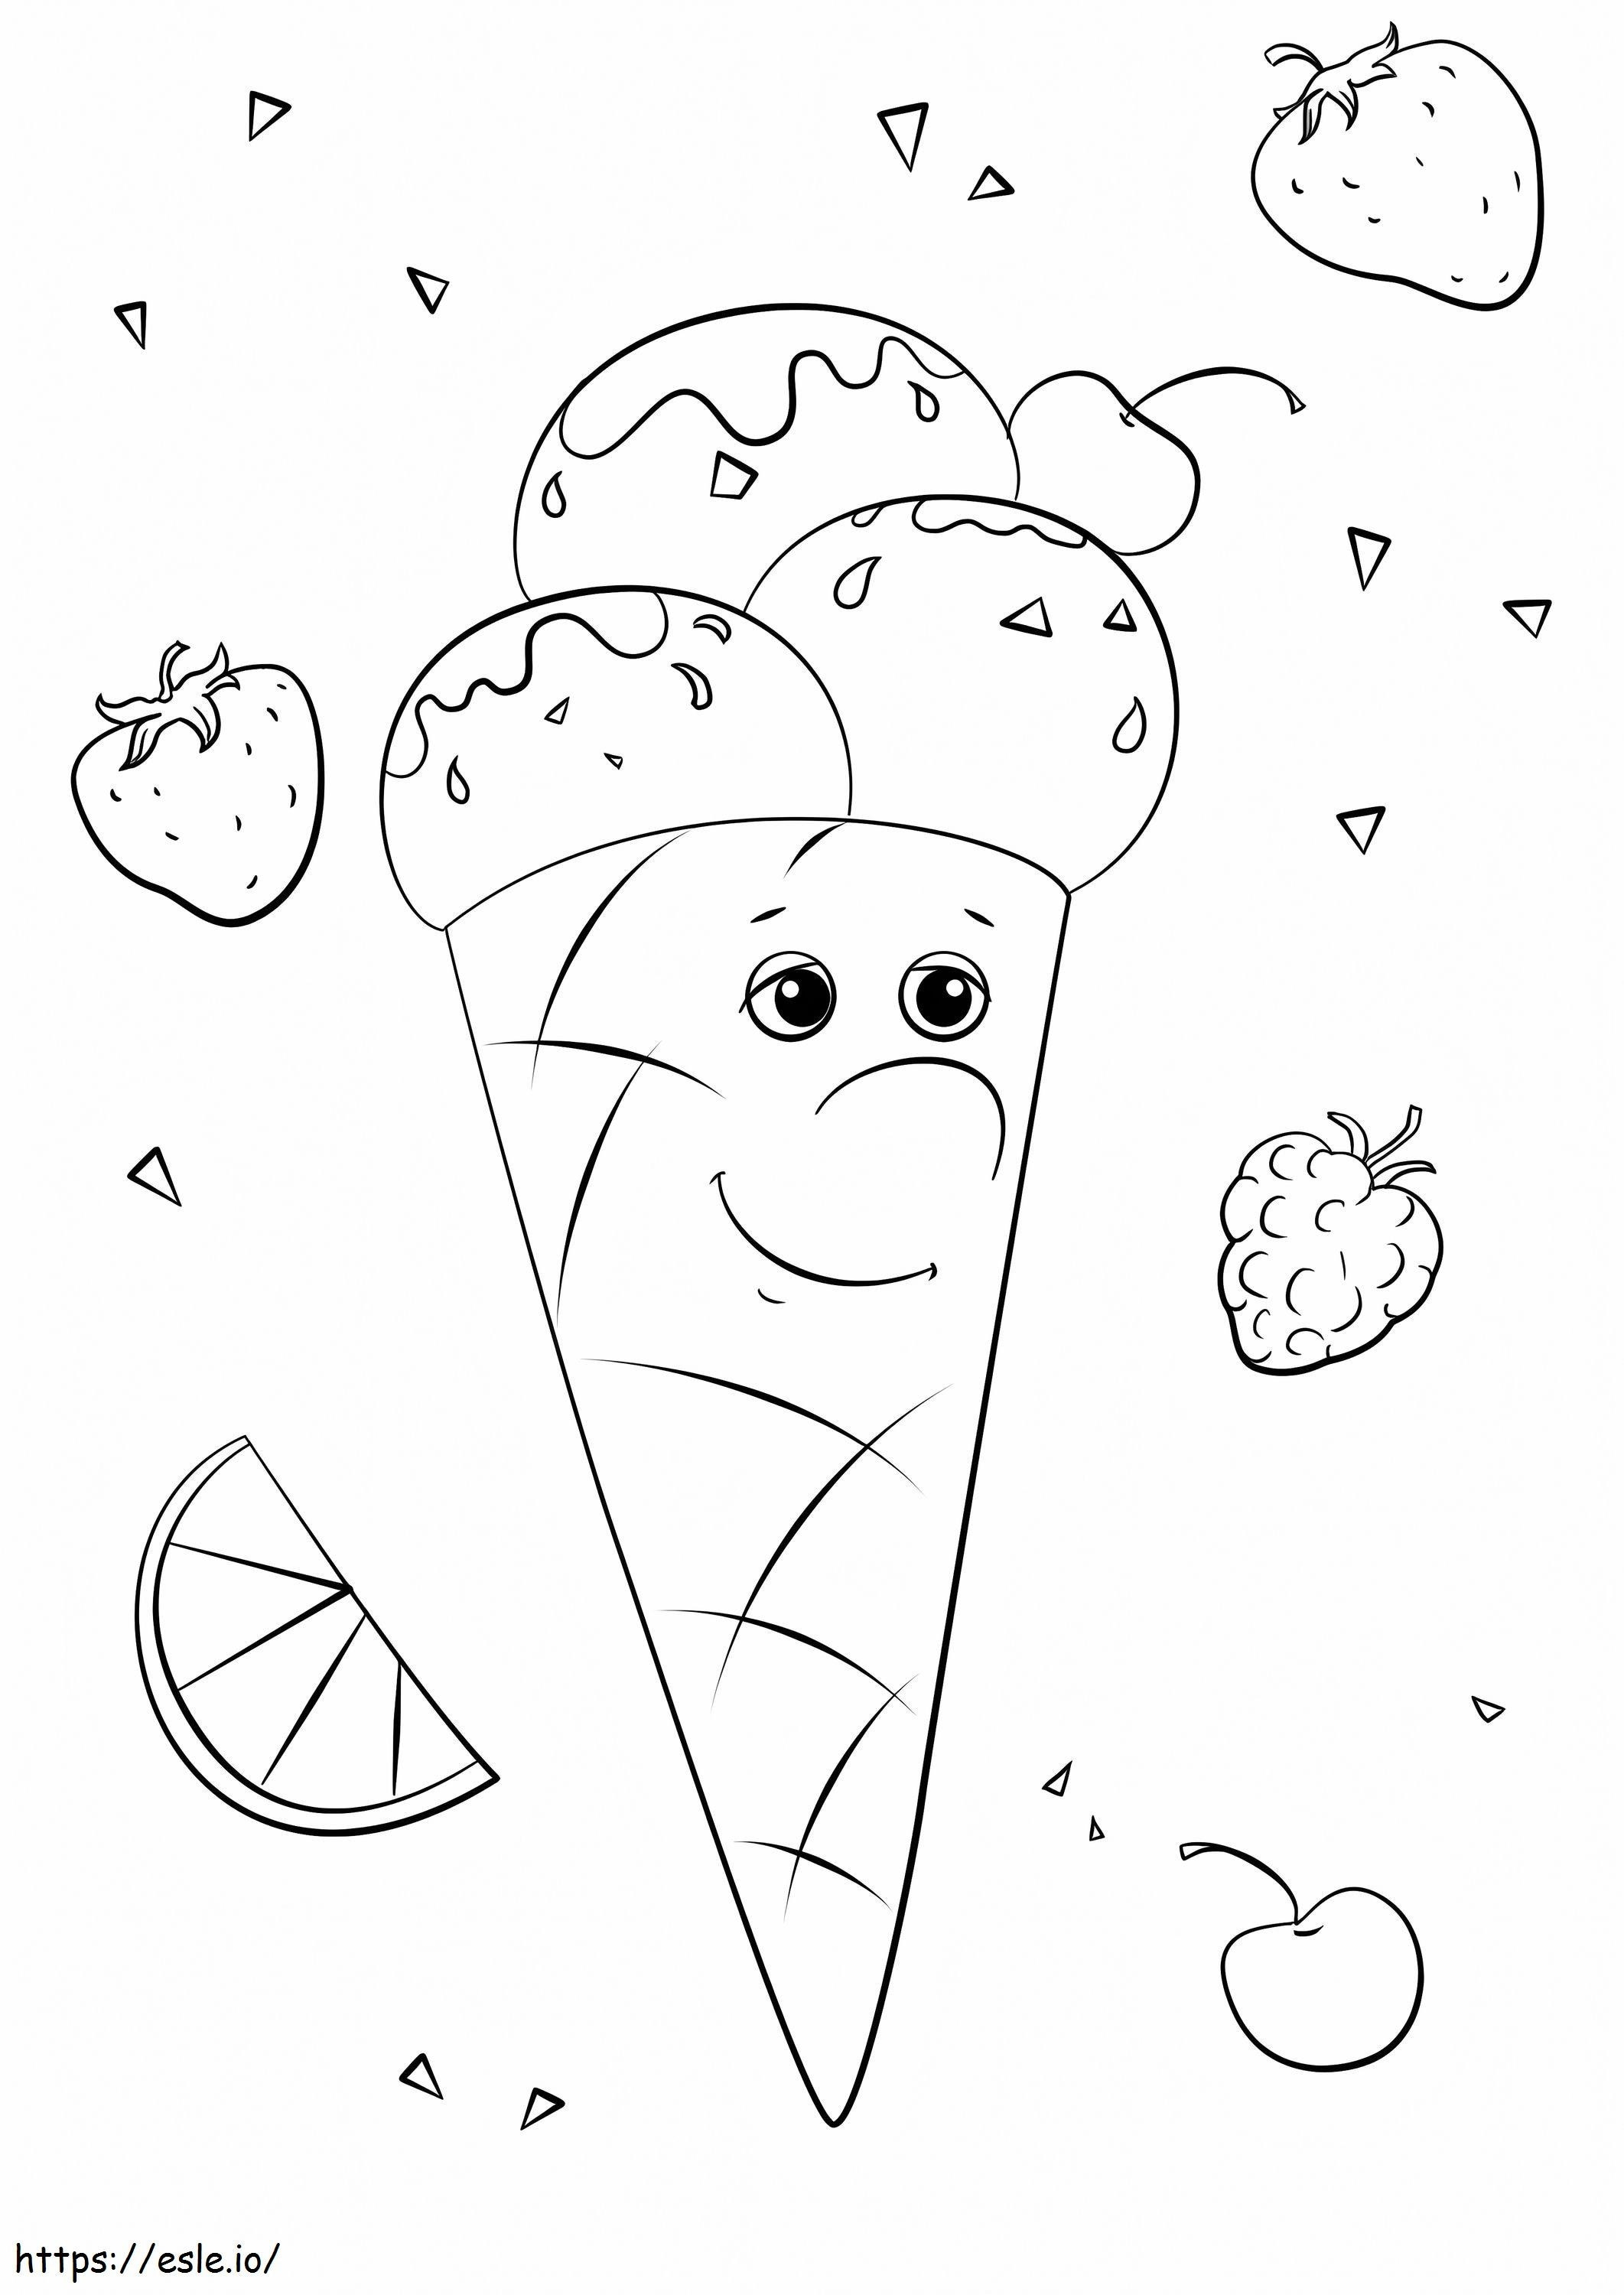 Ice Cream Character coloring page